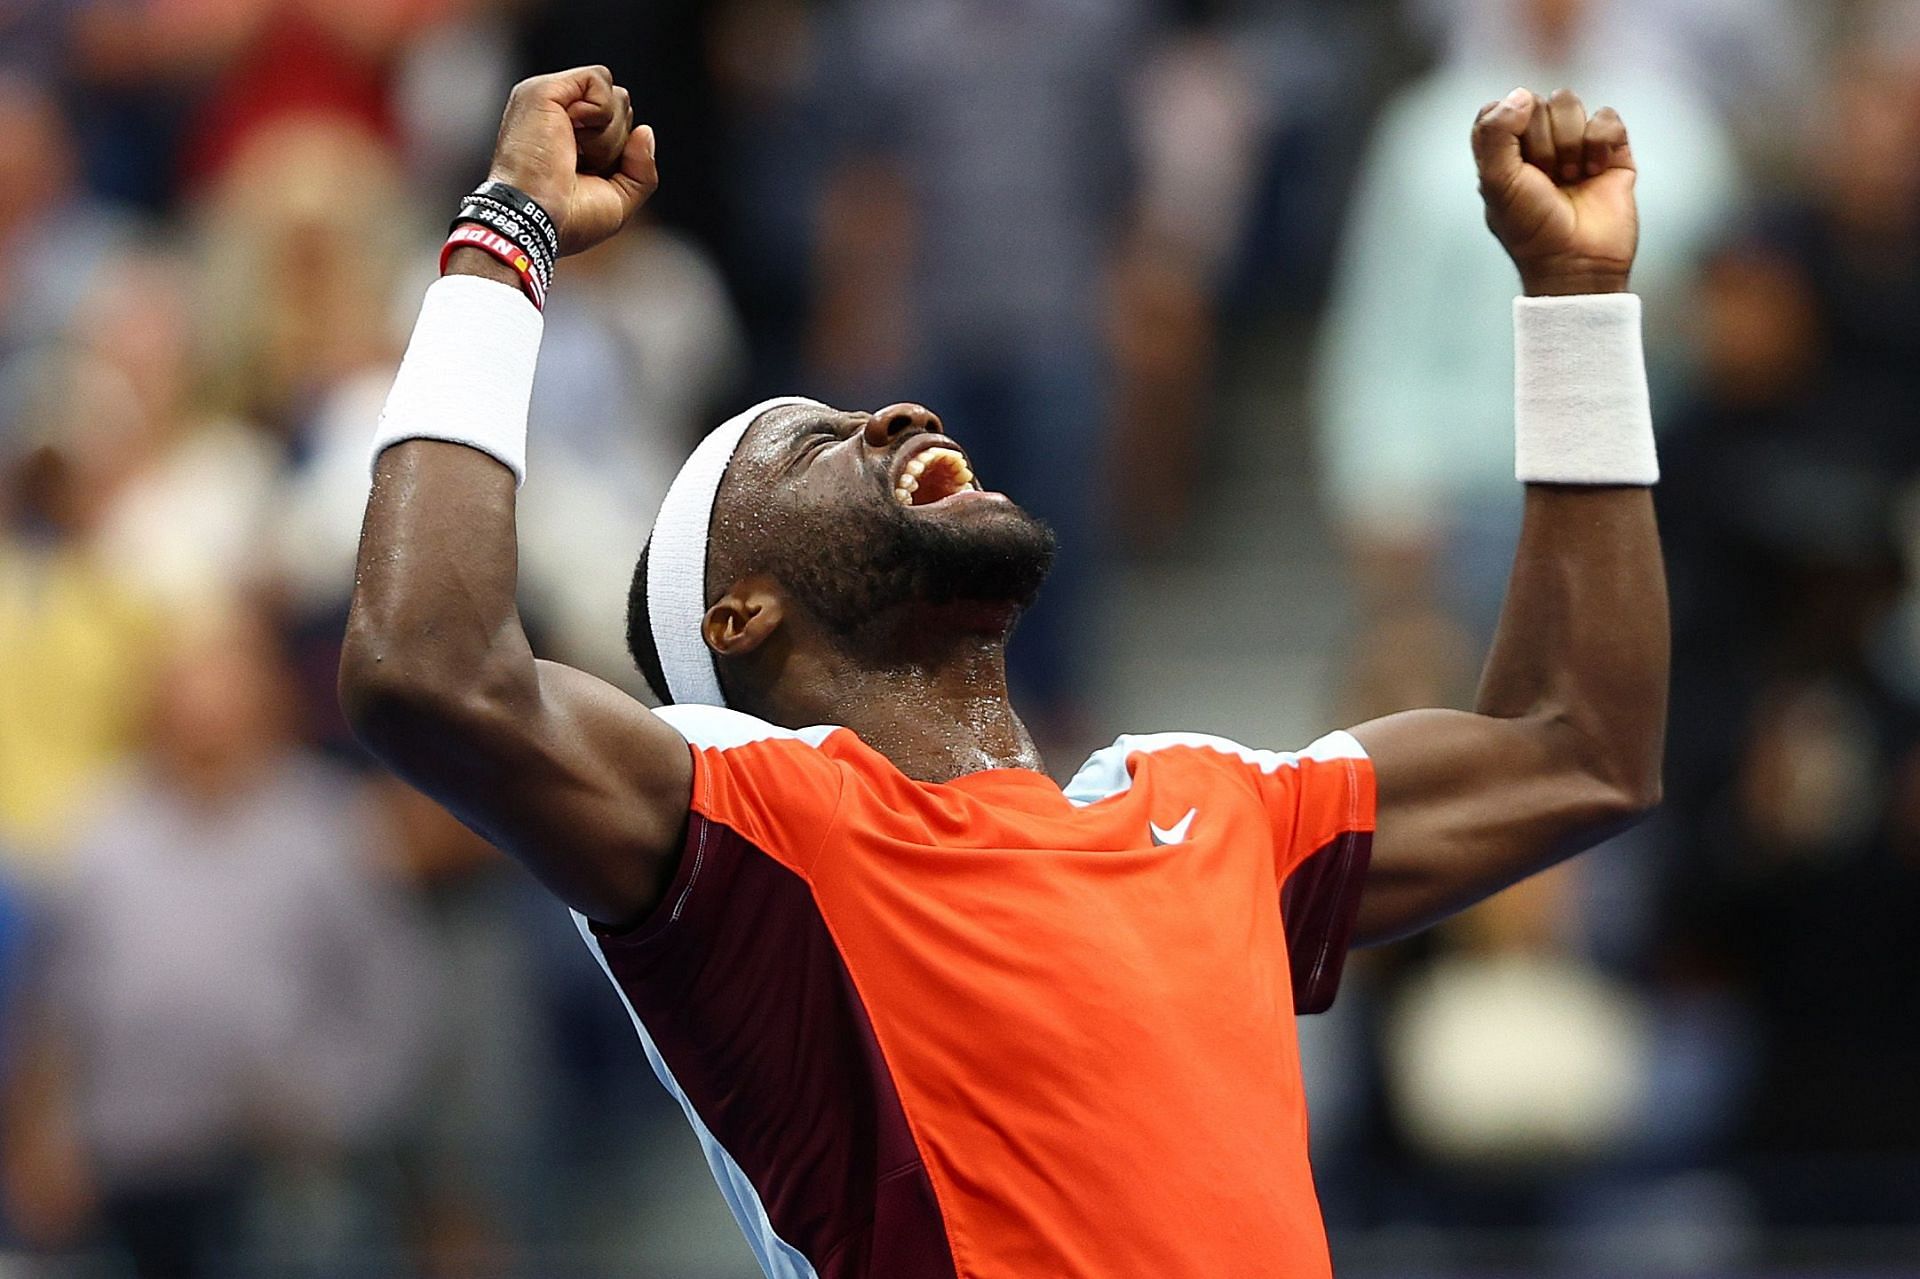 Frances Tiafoe says his life has changed since 2022 US Open run